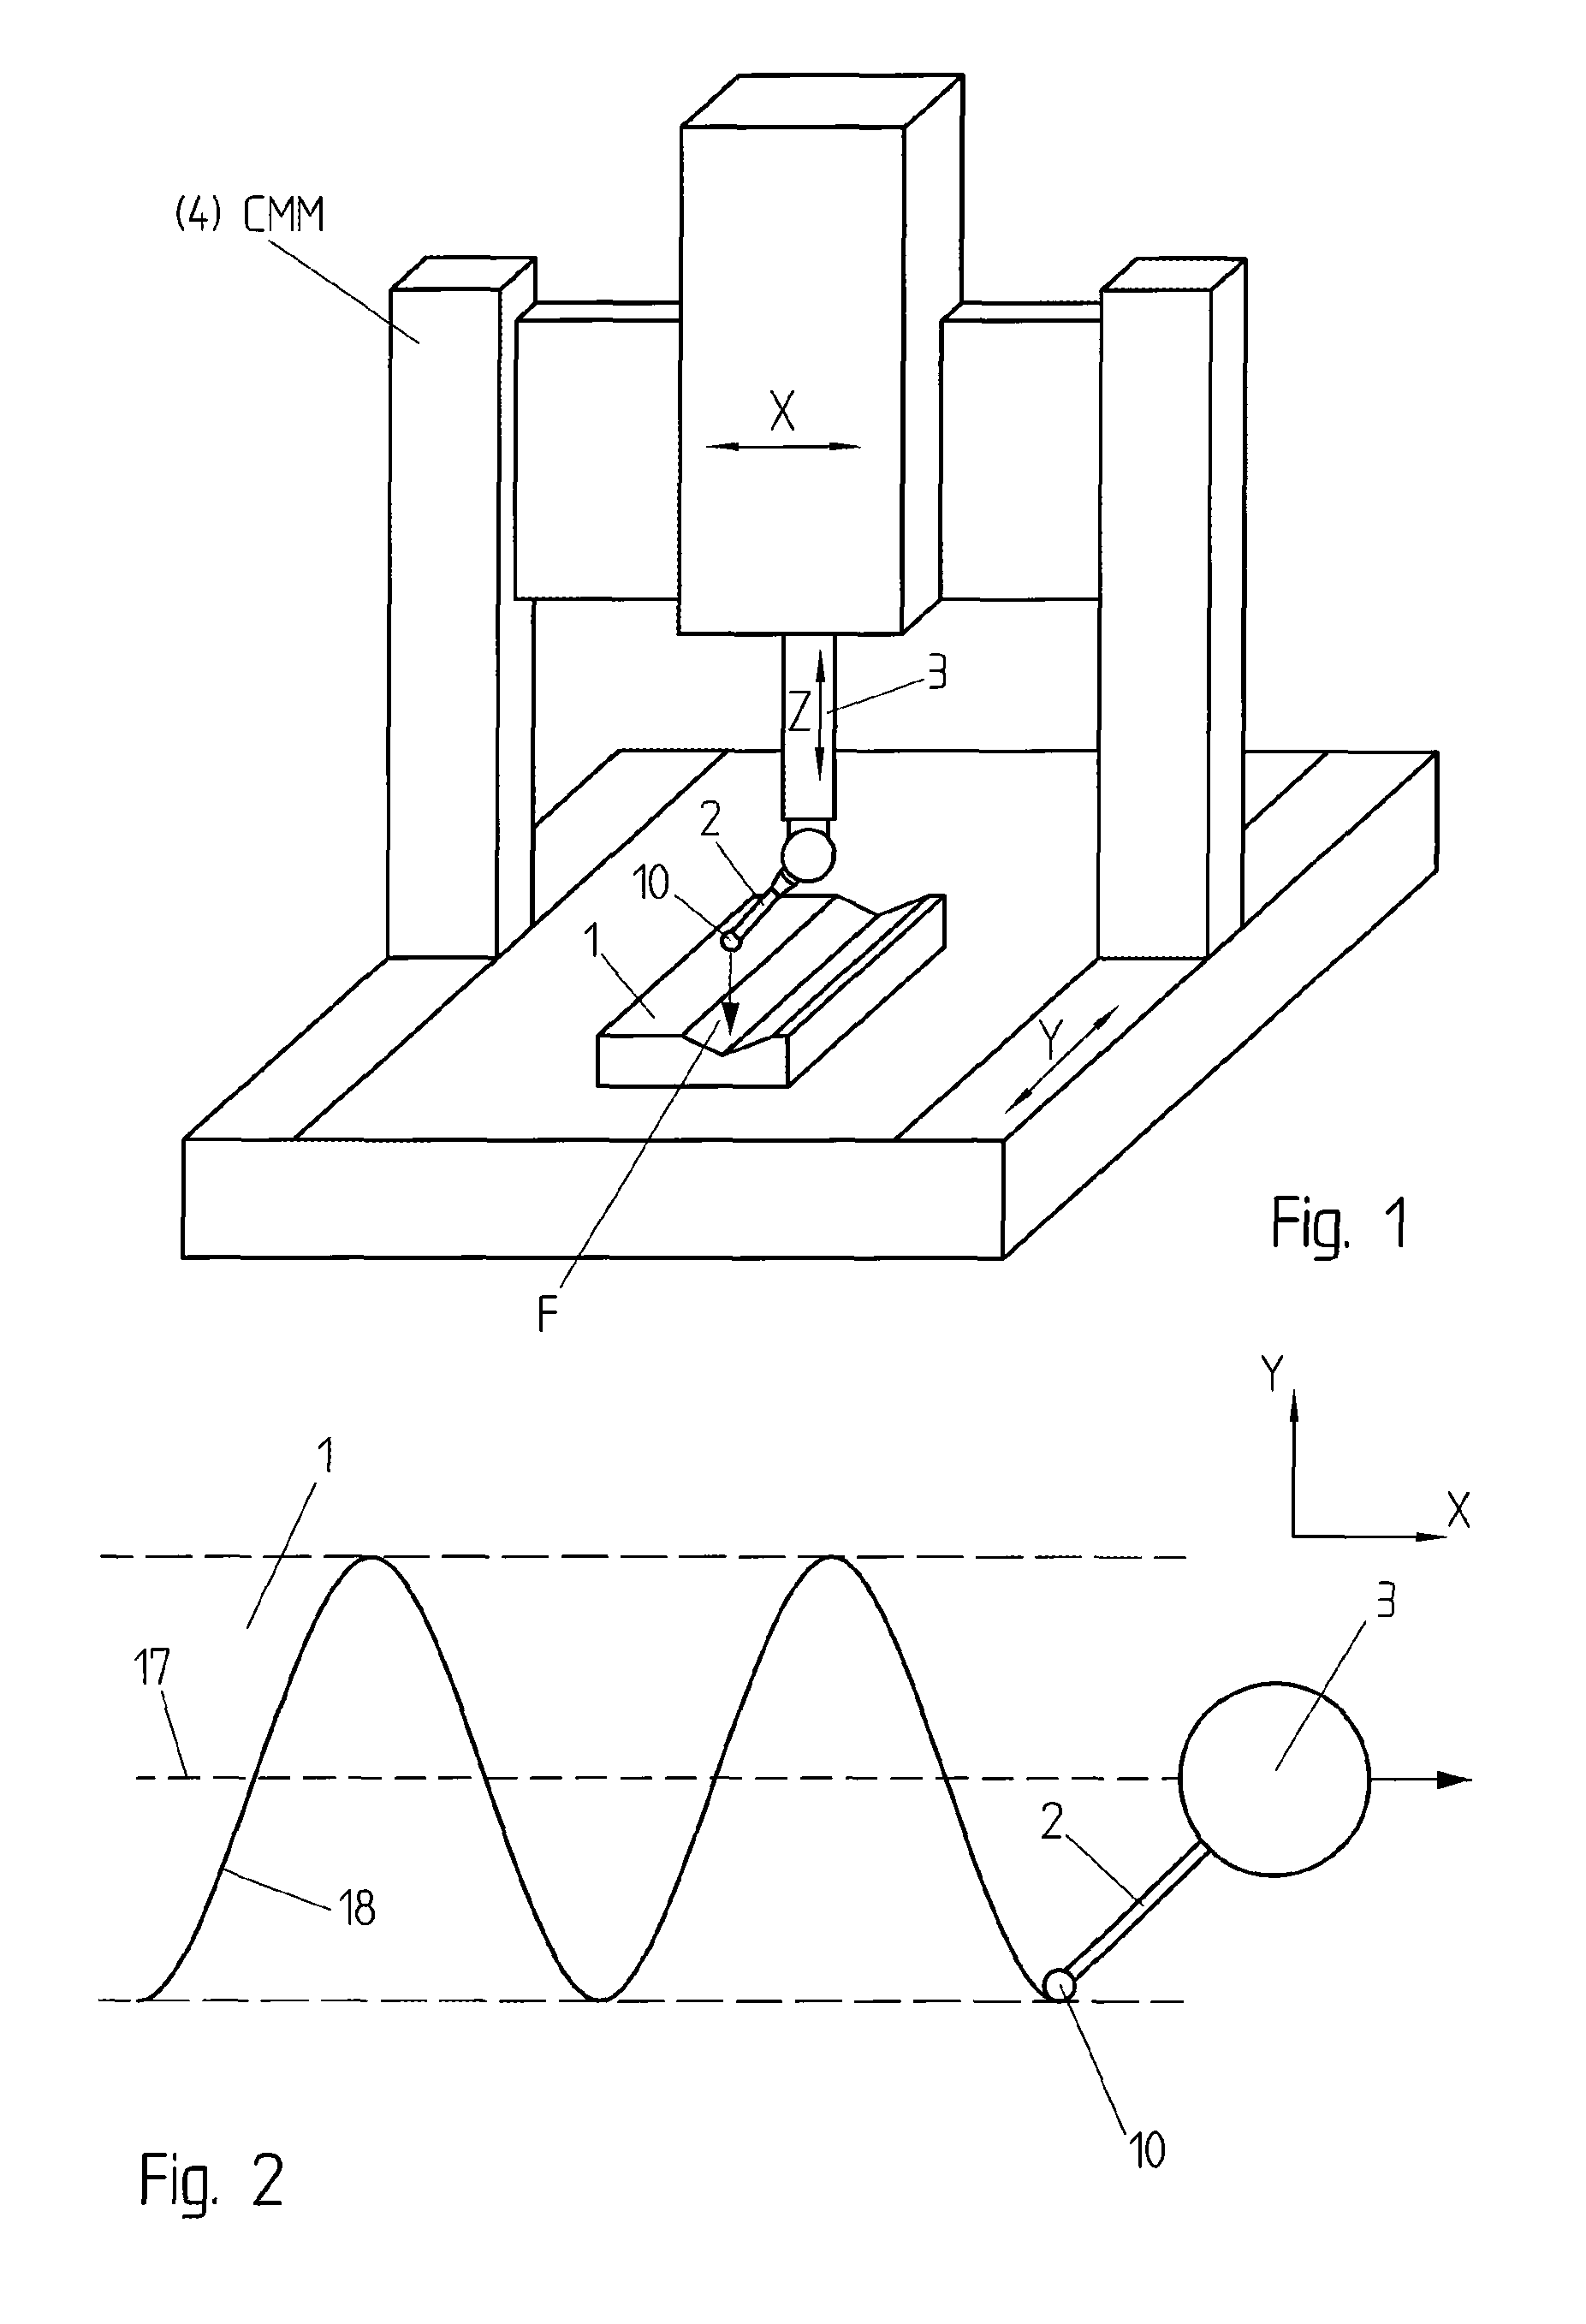 Oscillating scanning probe with constant contact force